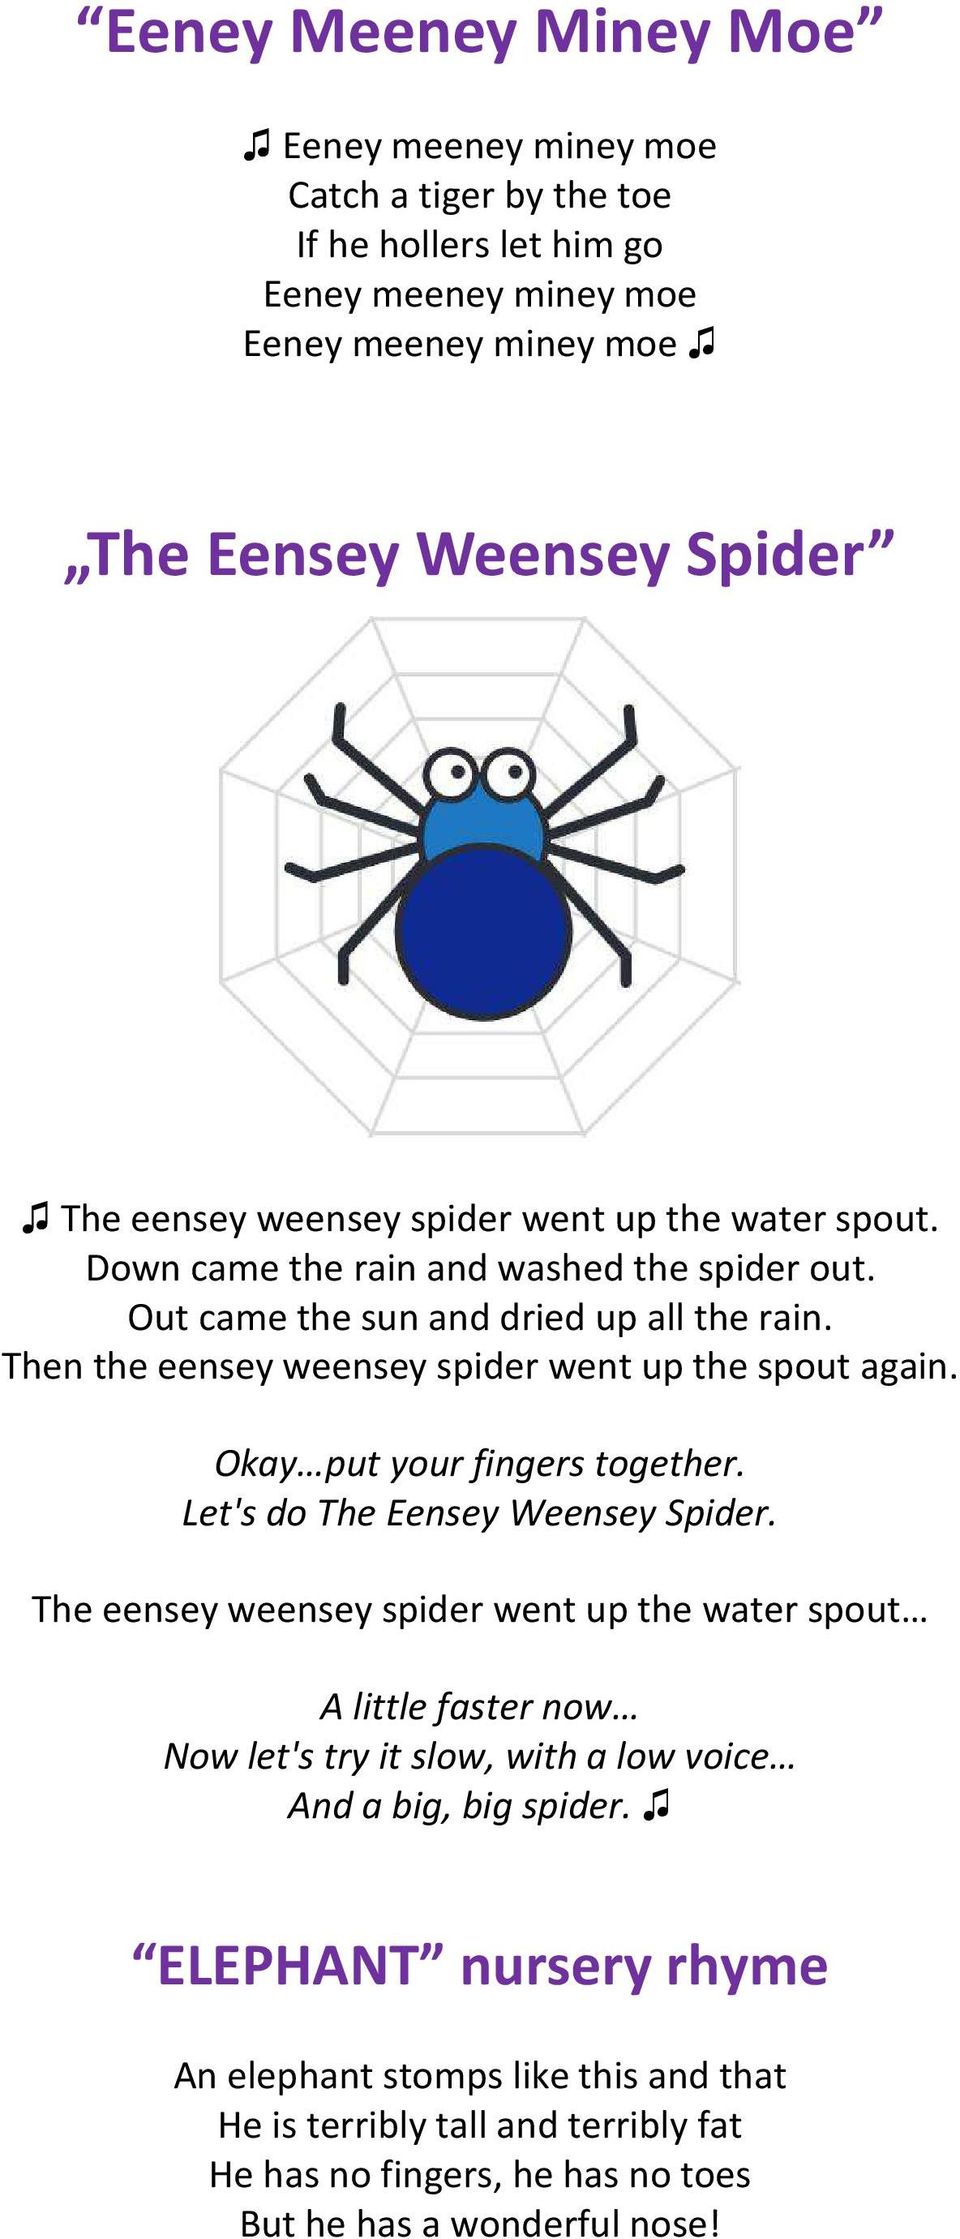 Then the eensey weensey spider went up the spout again. Okay put your fingers together. Let's do The Eensey Weensey Spider.